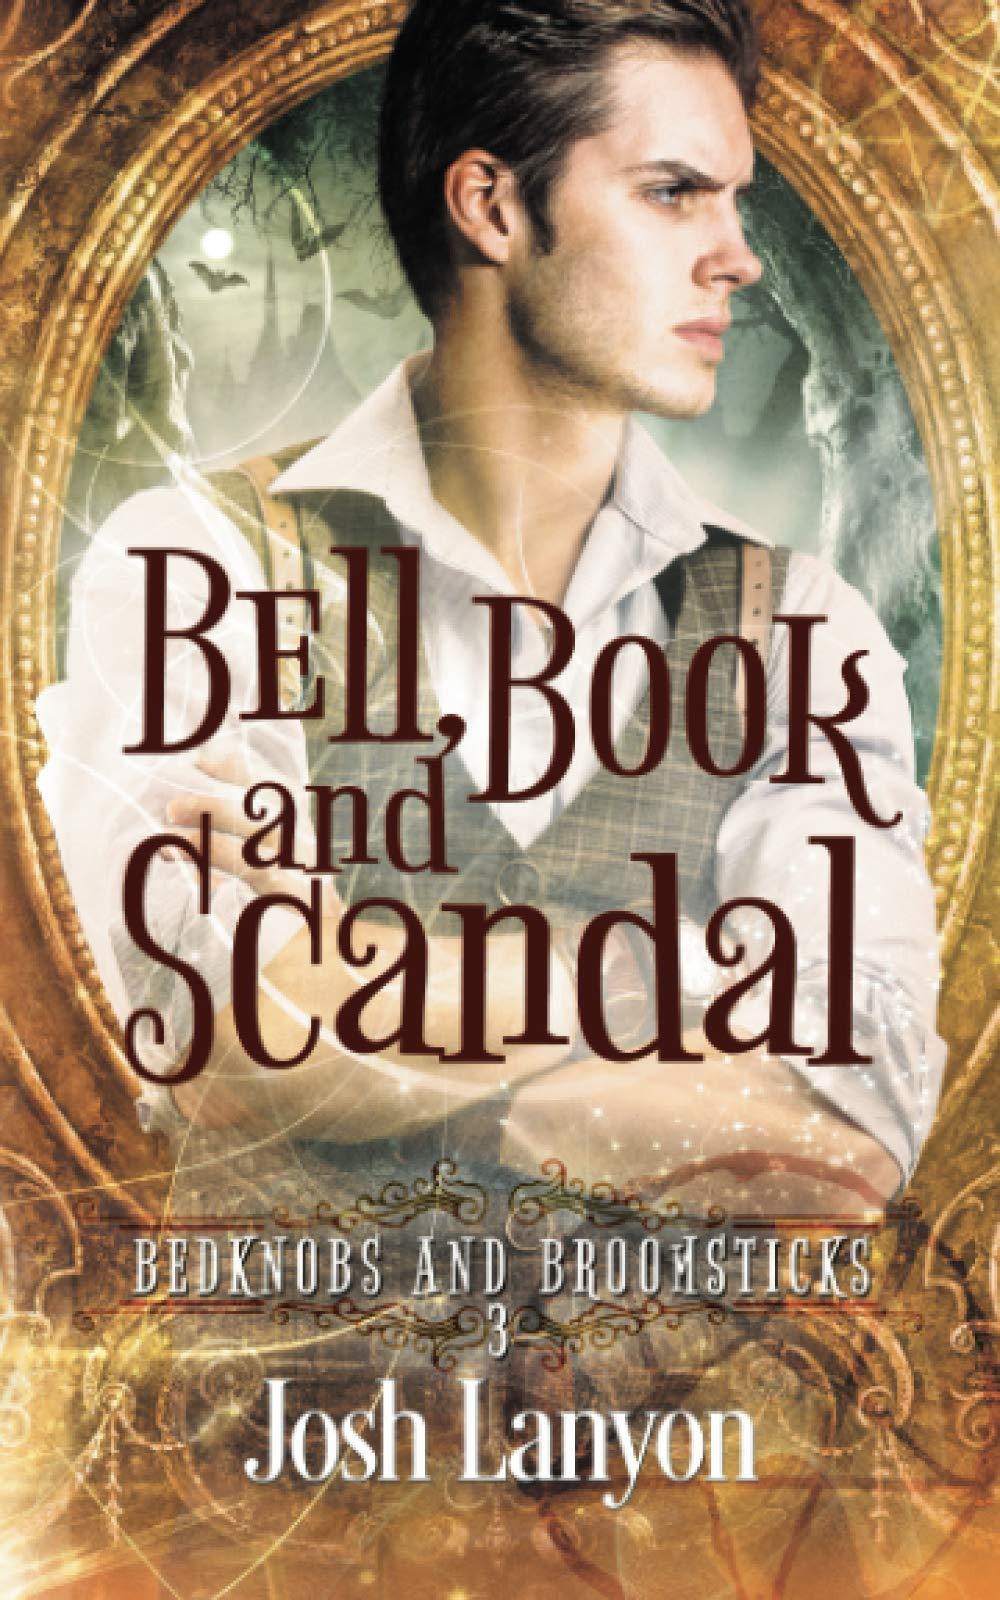 Bell, Book and Scandal